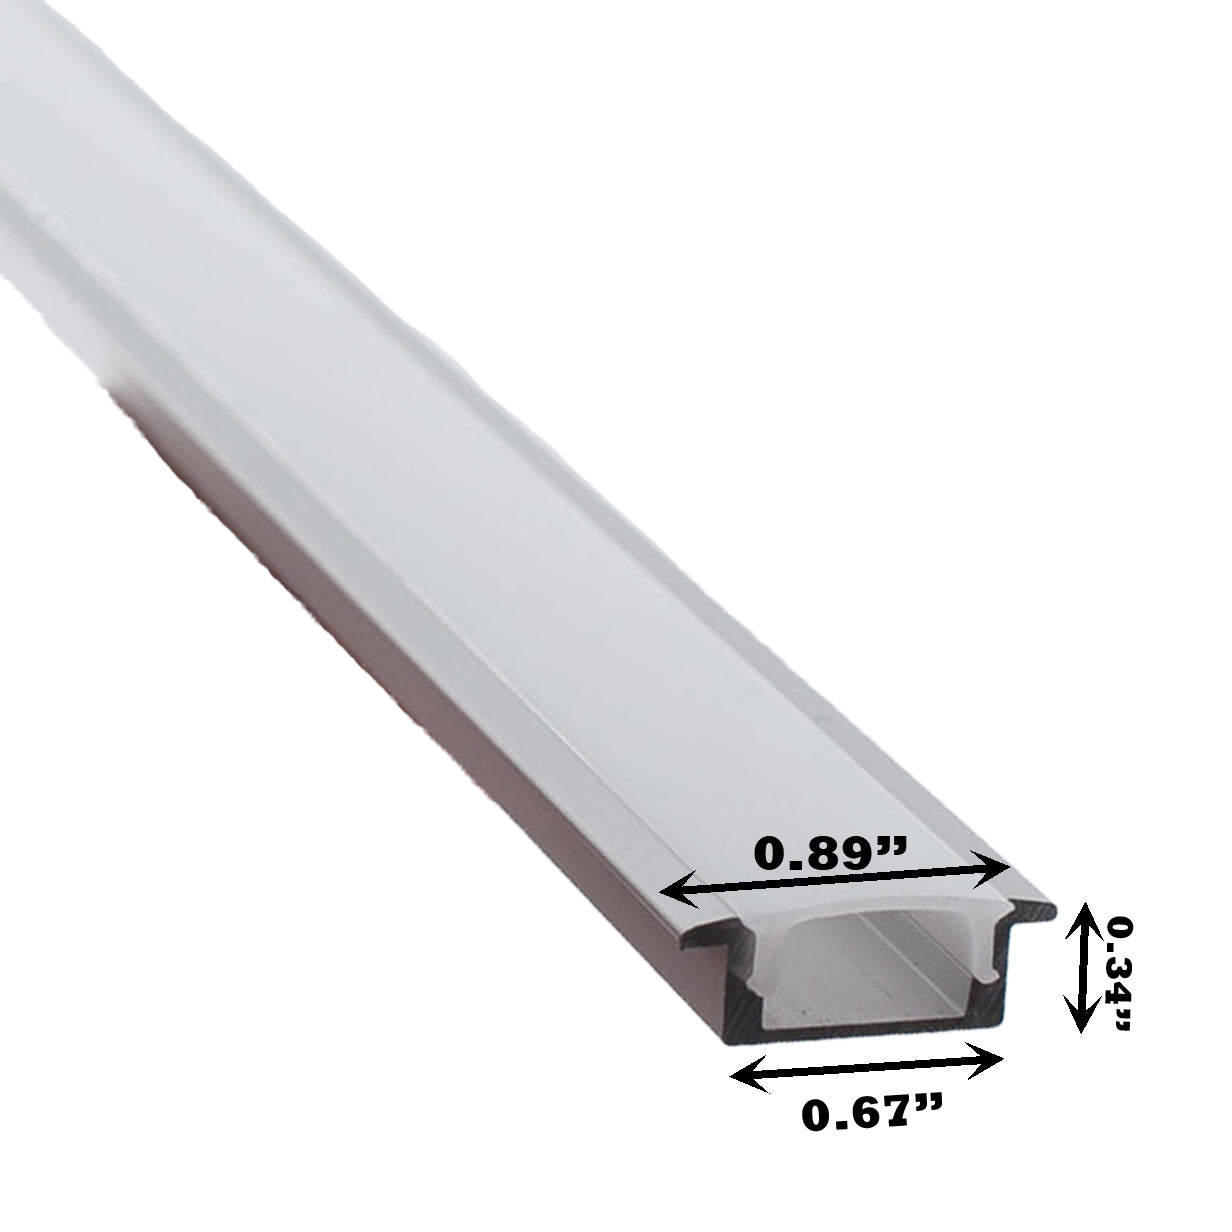 Shallow recessed LED Strip light channel